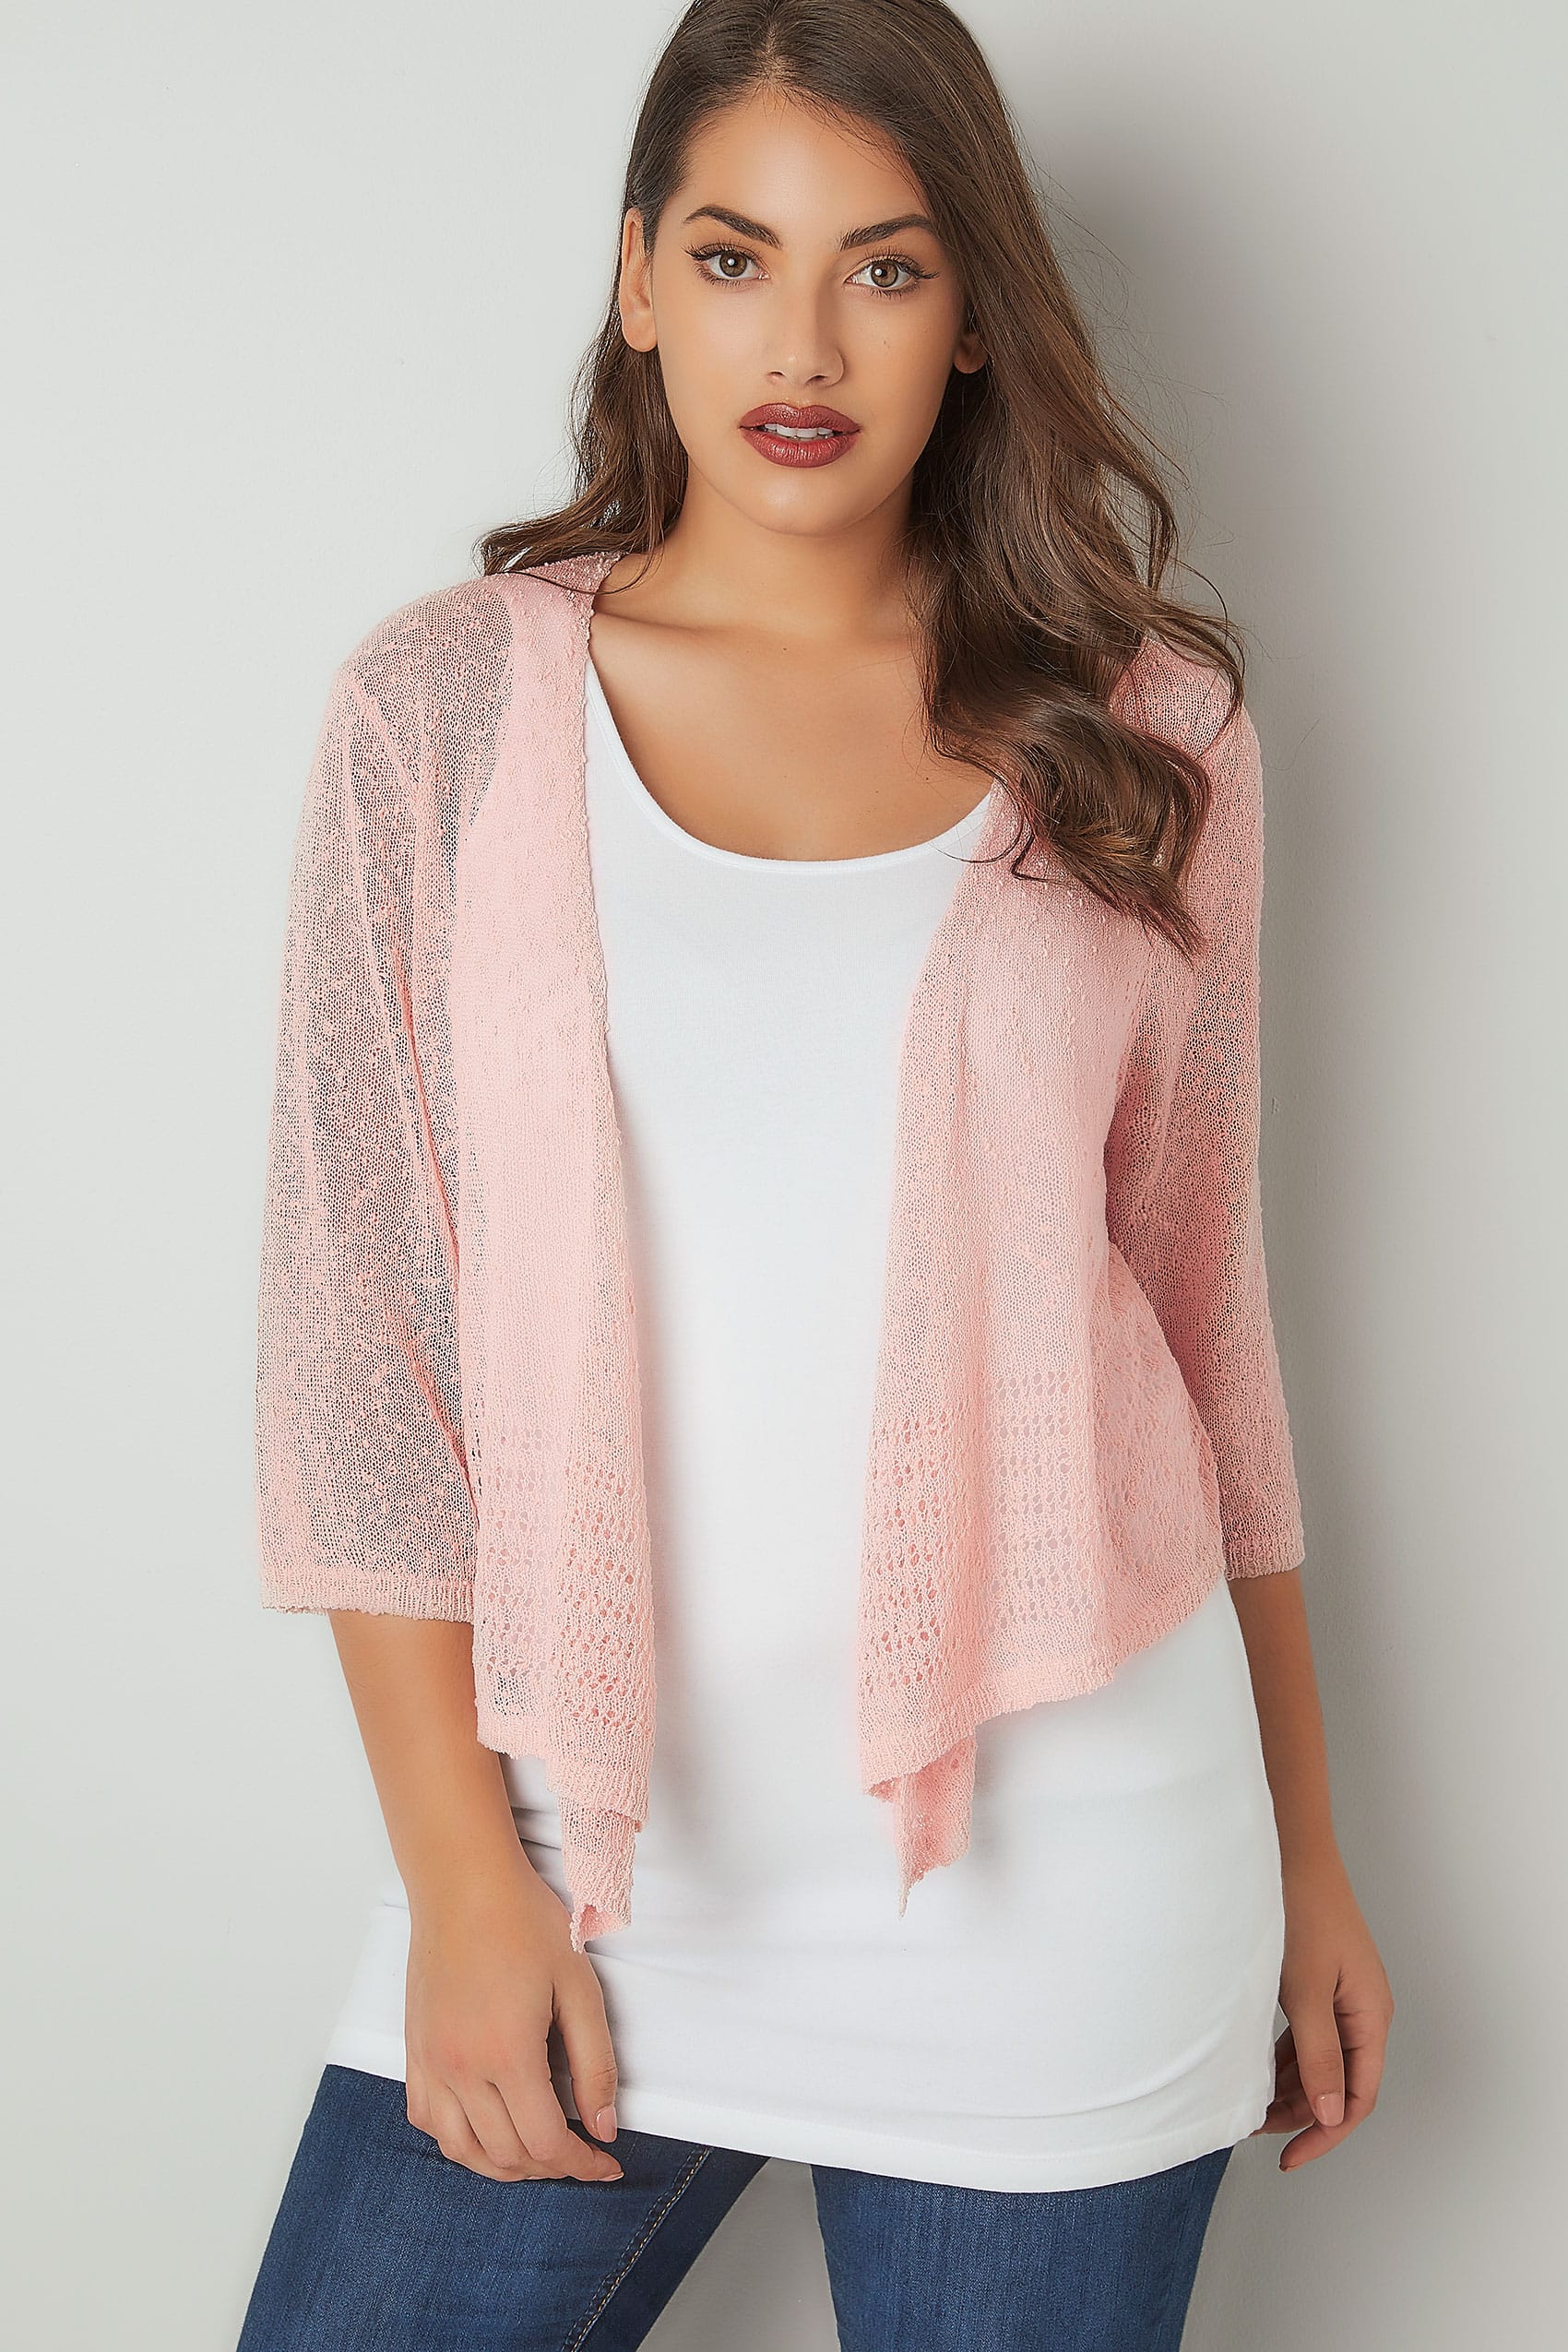 Pink Popcorn Crochet Cropped Shrug, plus size 16 to 36